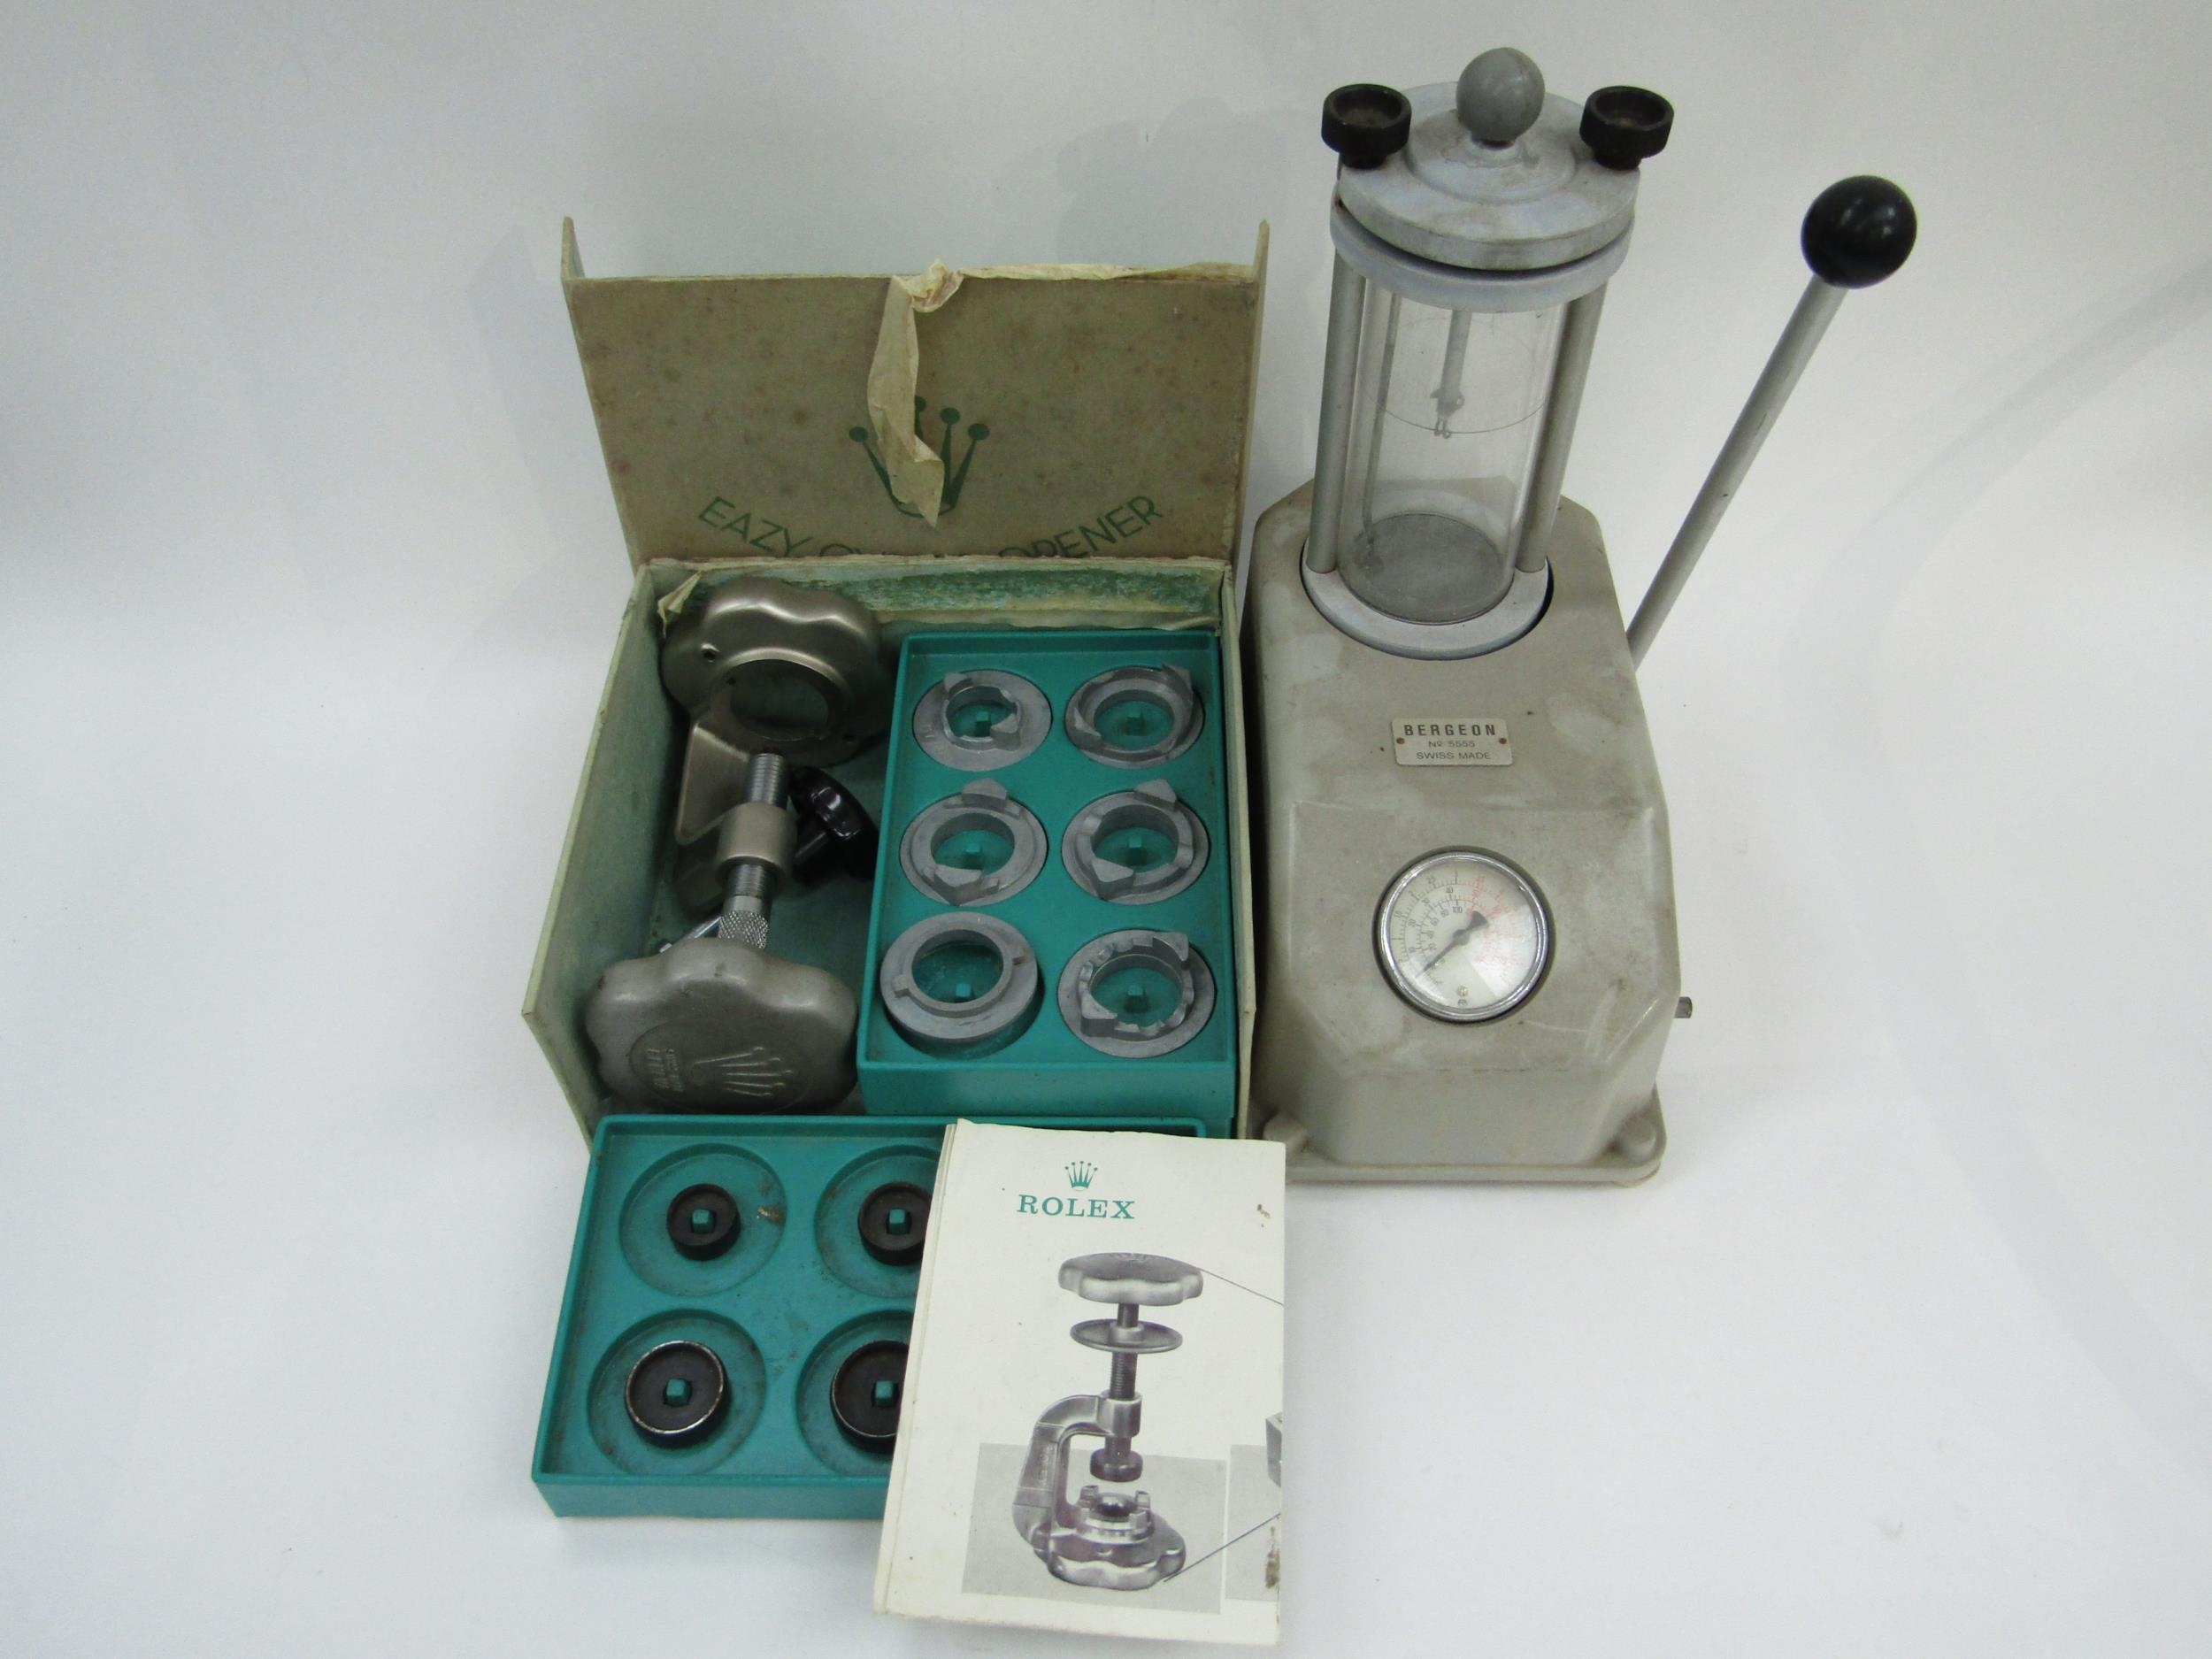 A Bergeon No. 5555 watch pressure testing machine, with a boxed Rolex vintage Eazy Oyster Opener